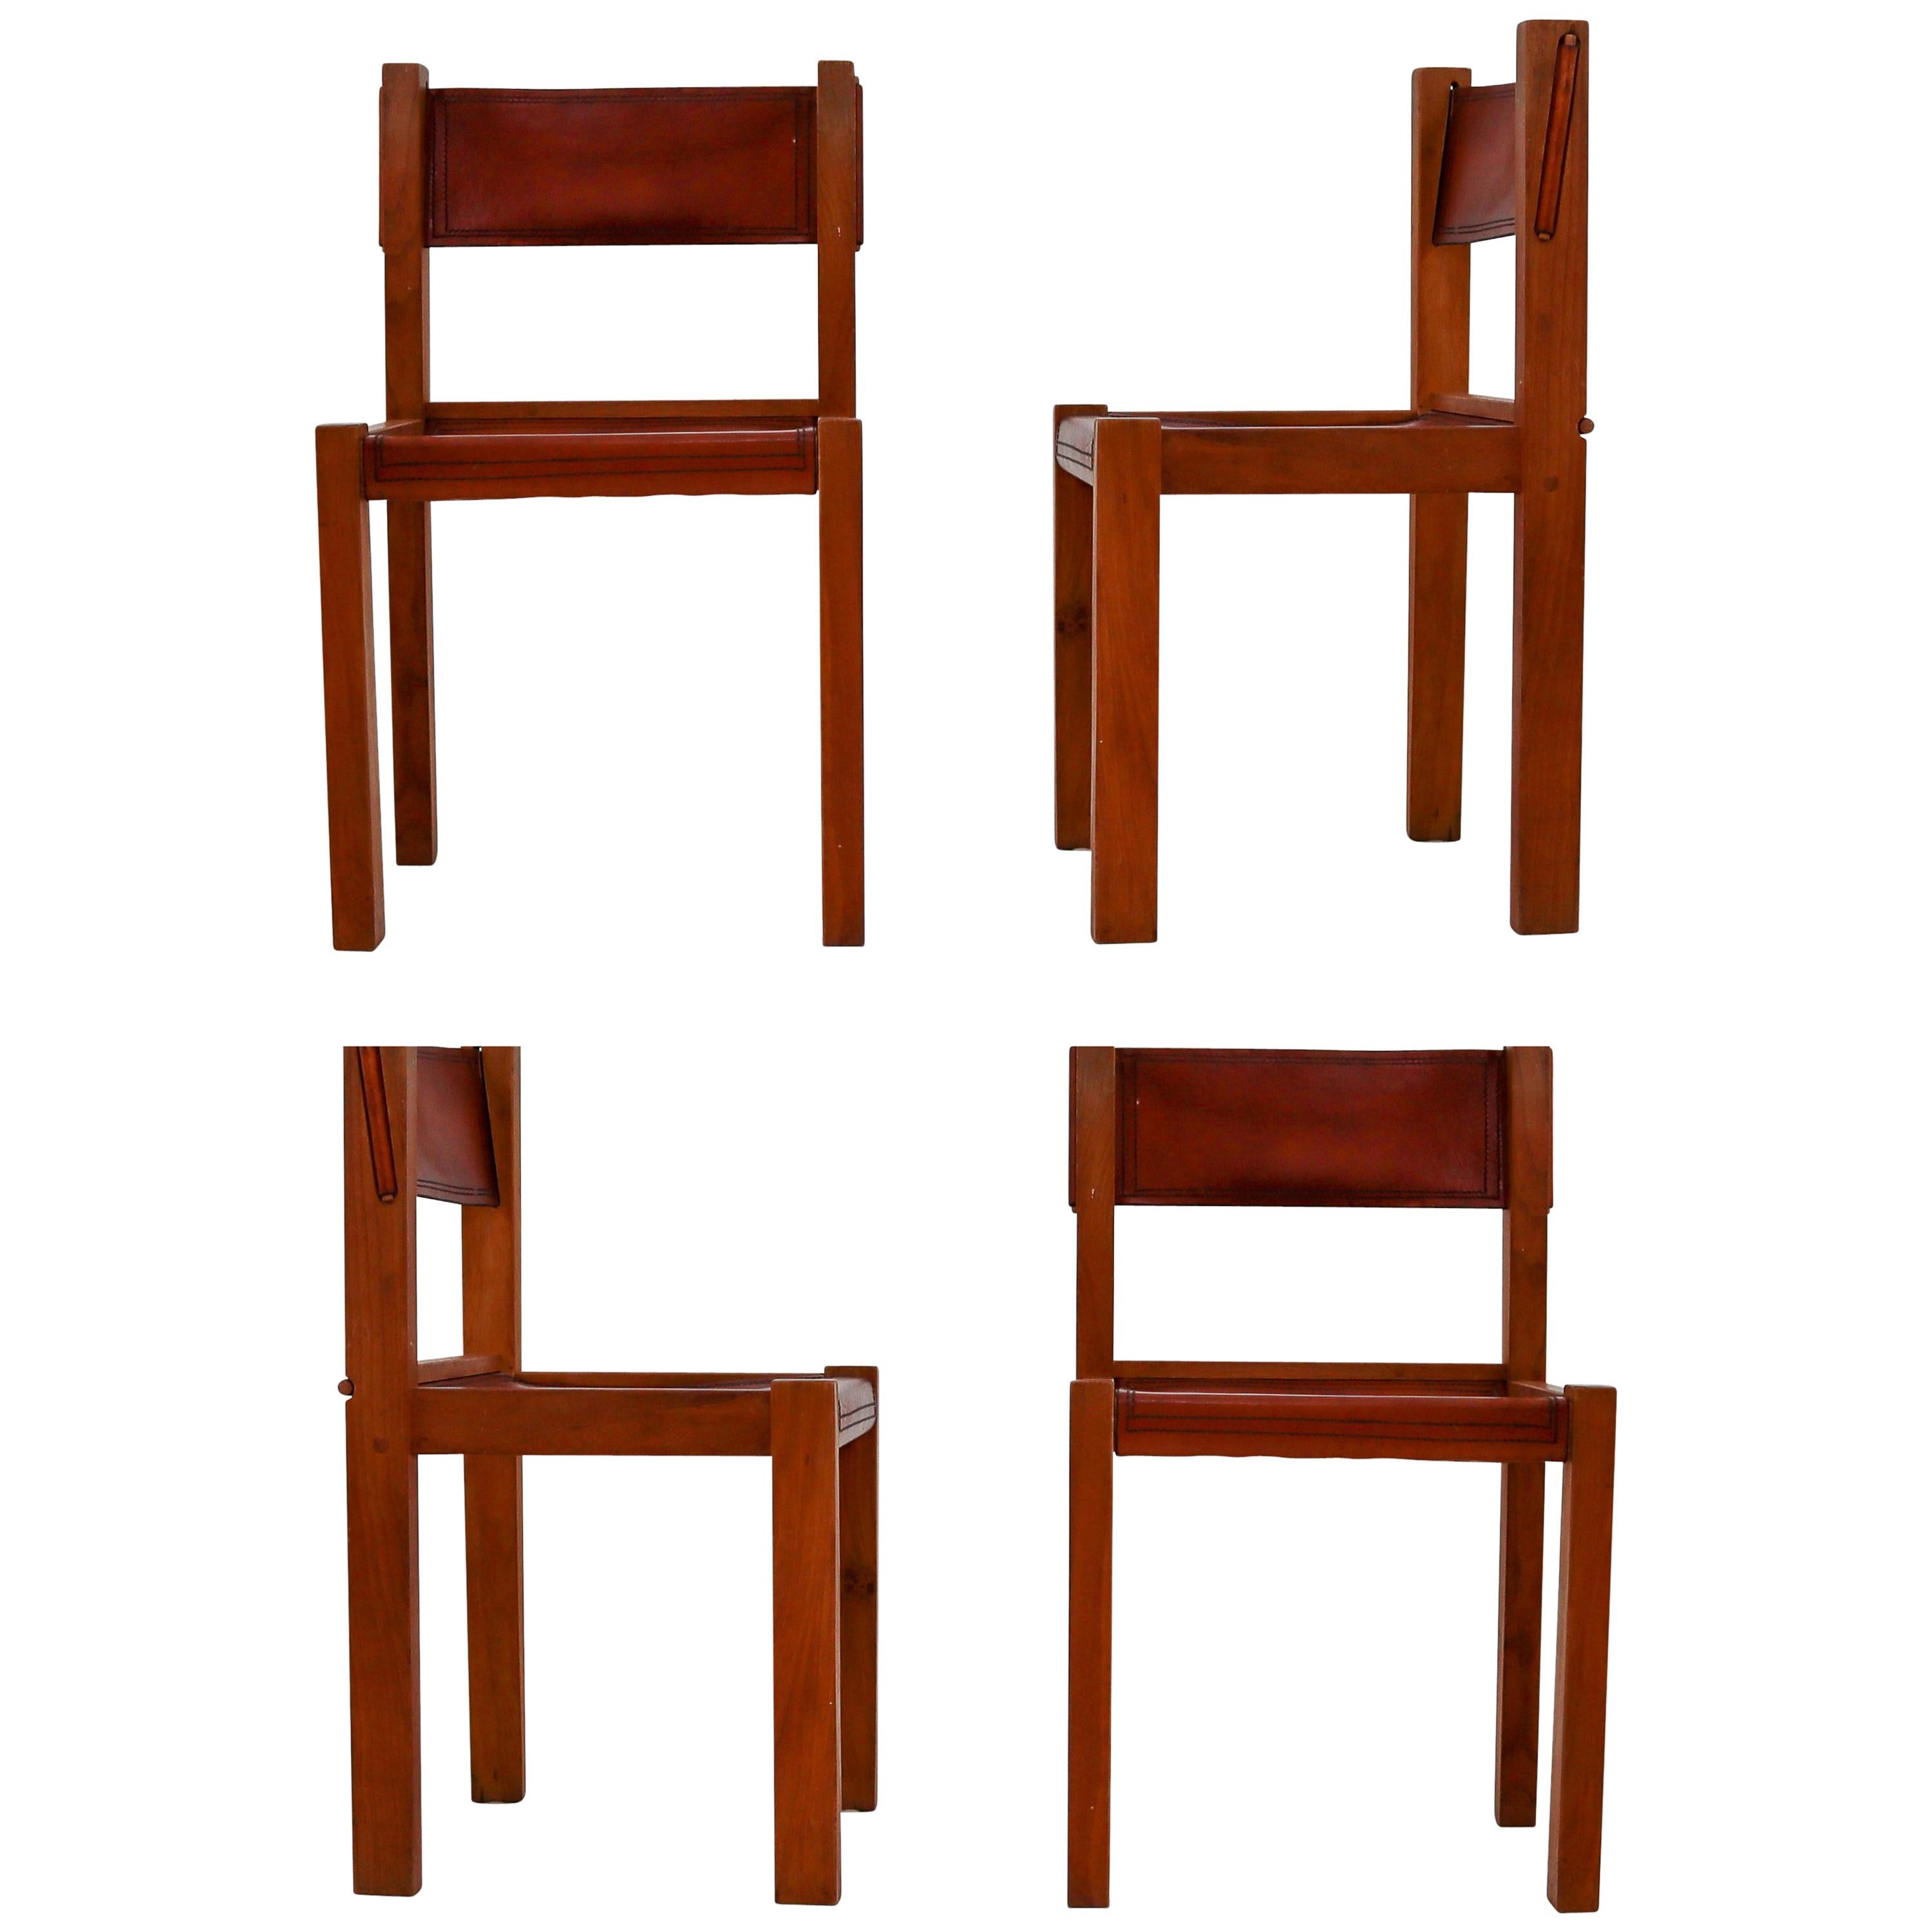 Four Midcentury Wood and Leather Dining Chairs